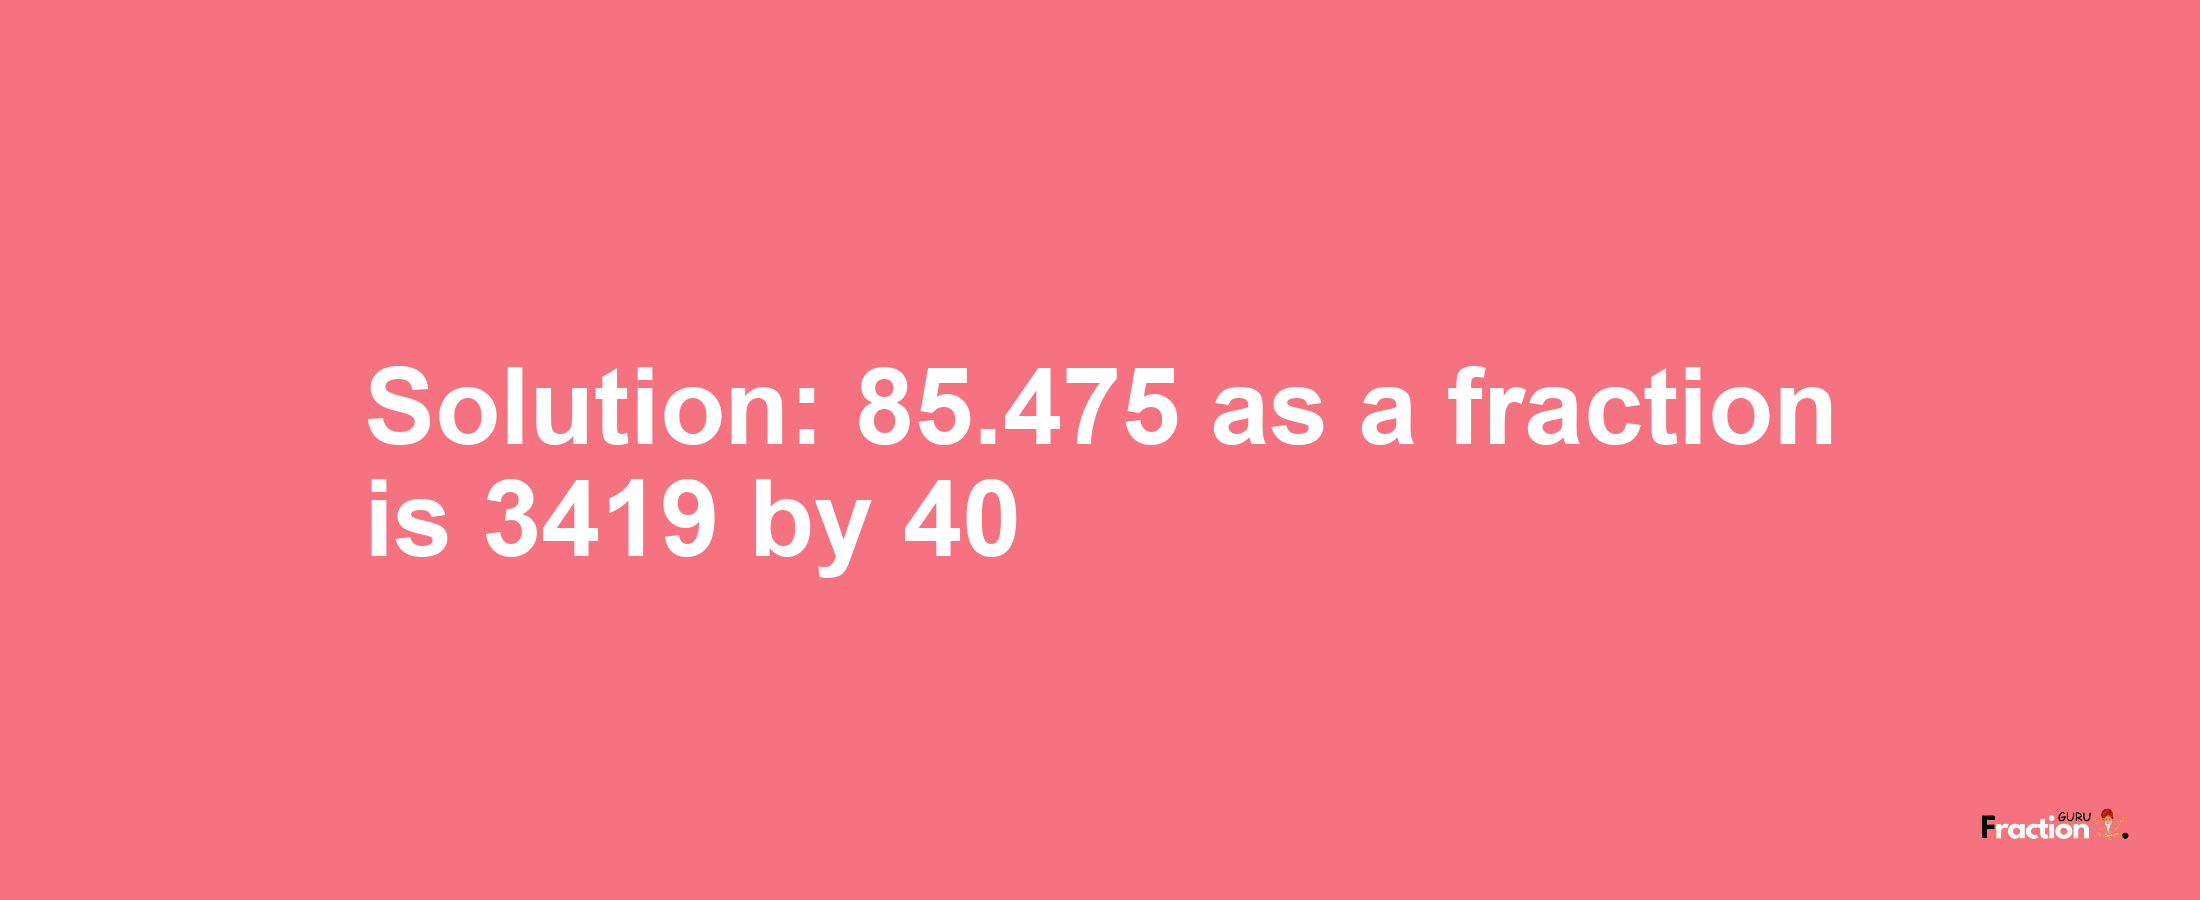 Solution:85.475 as a fraction is 3419/40